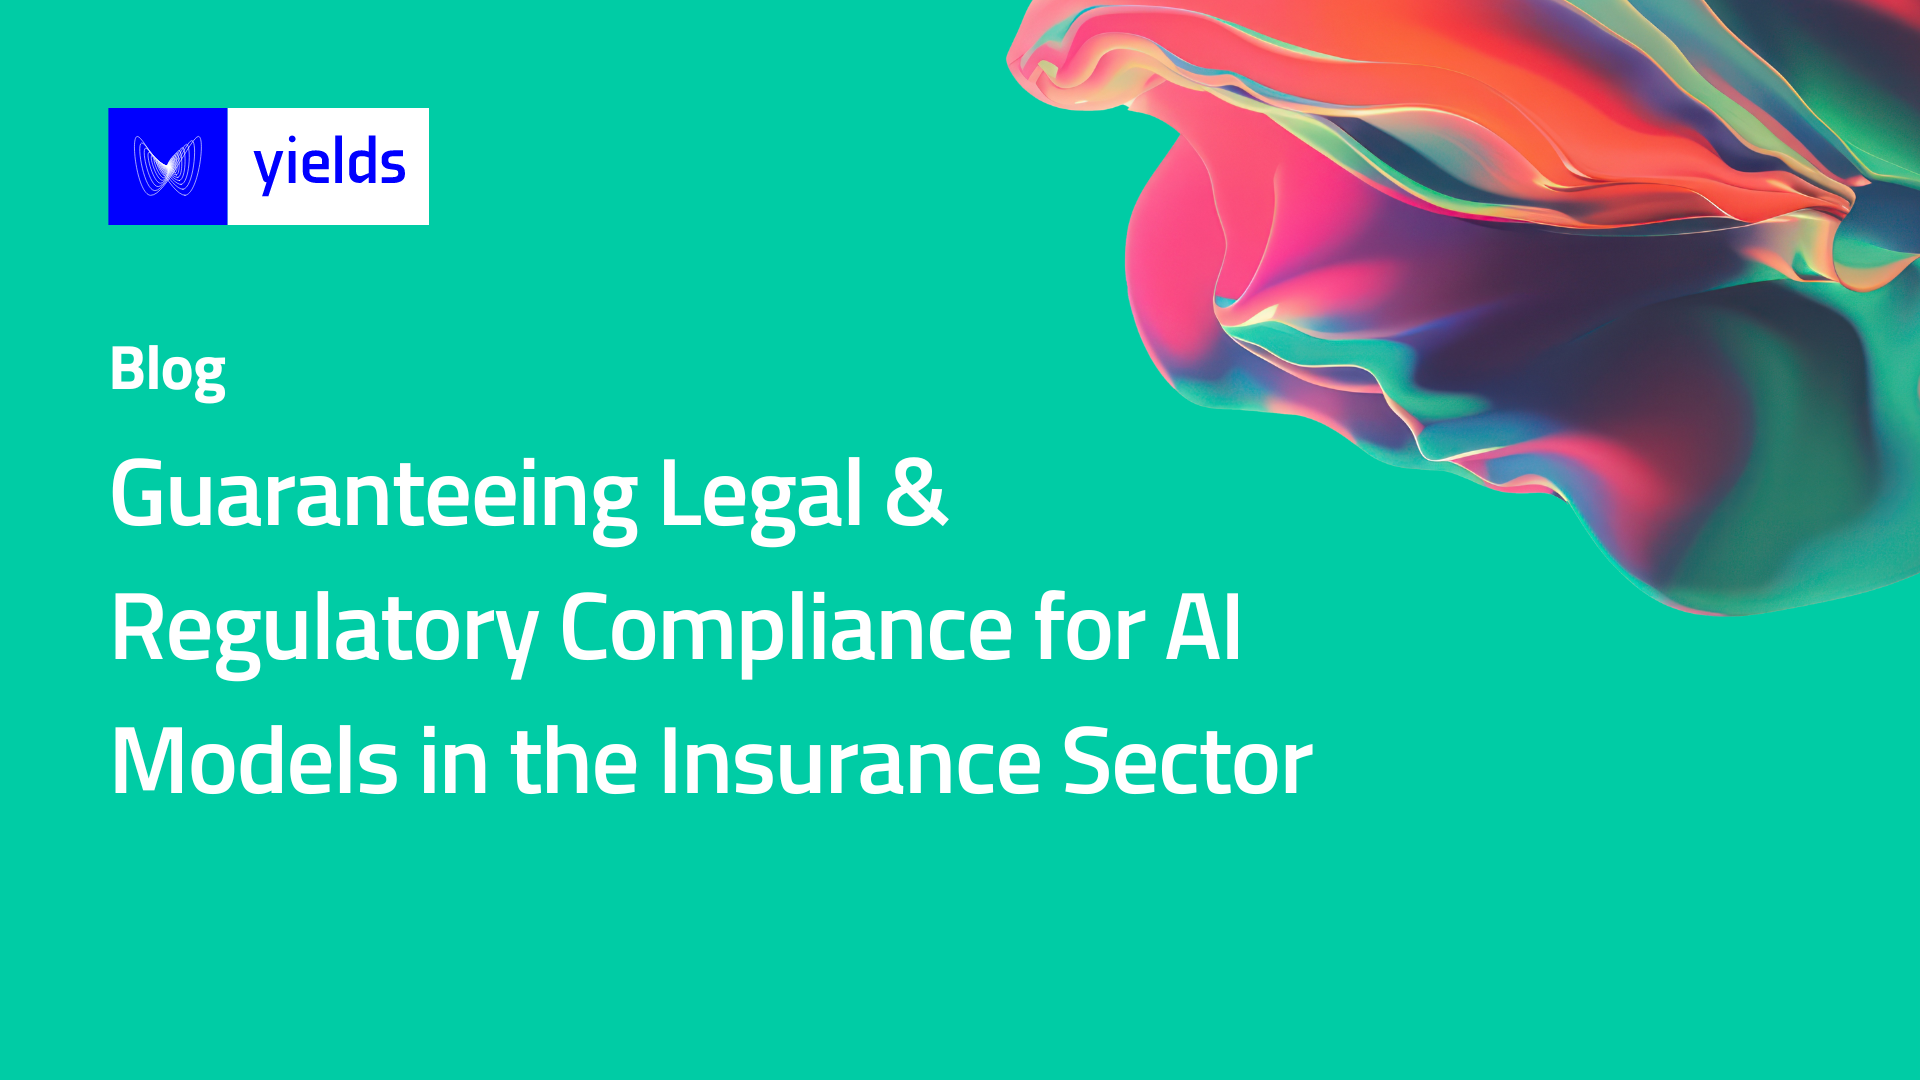 Guaranteeing Legal & Regulatory Compliance for AI Models in the Insurance Sector